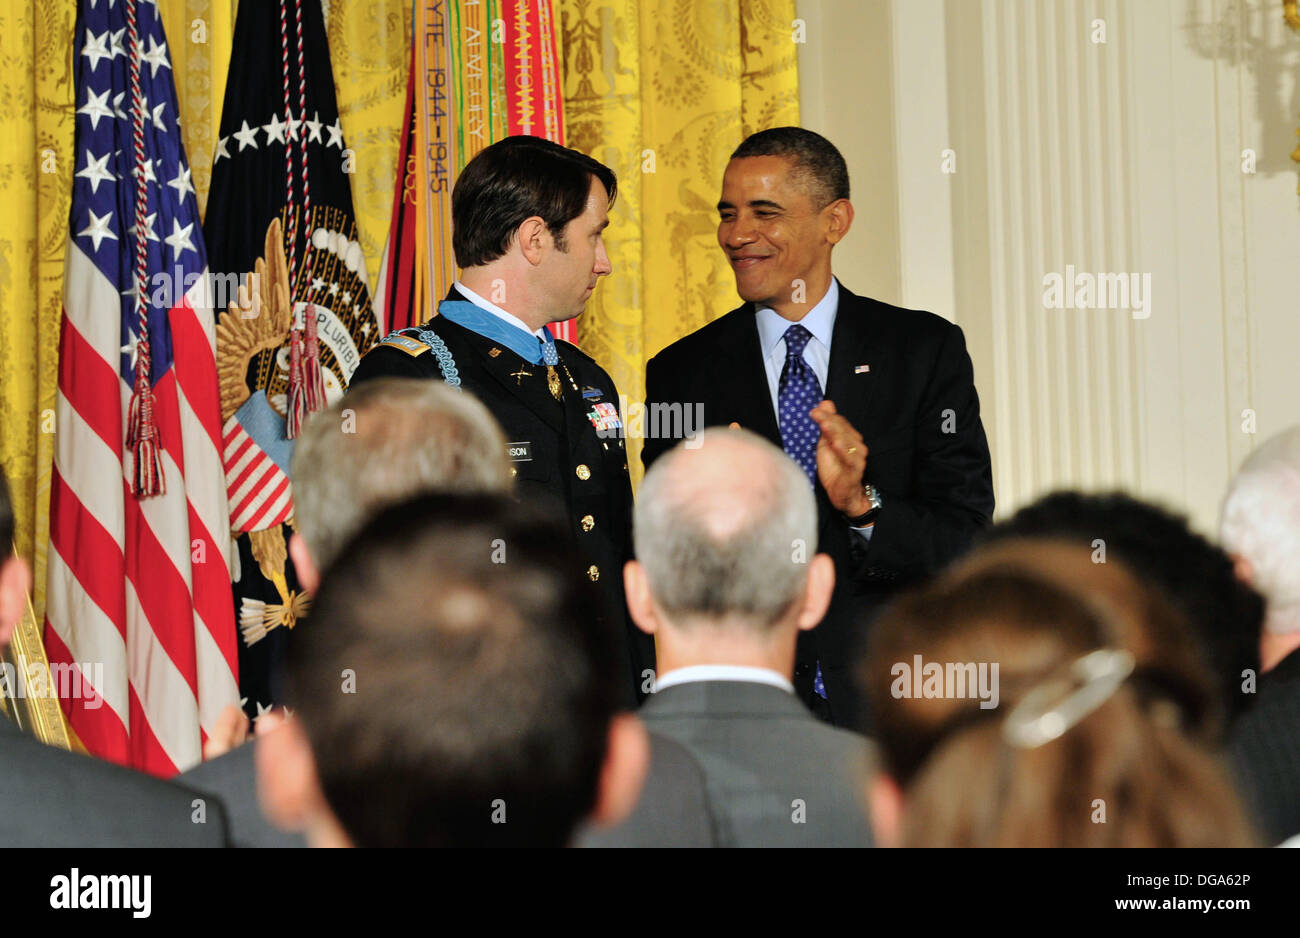 US President Barack Obama congratulates former US Army Capt. William D. Swenson after presenting him with the Medal of Honor during a ceremony in the East Room of the White House October 15, 2013 in Washington, DC. The Medal of Honor is the nation's highest military honor. Stock Photo